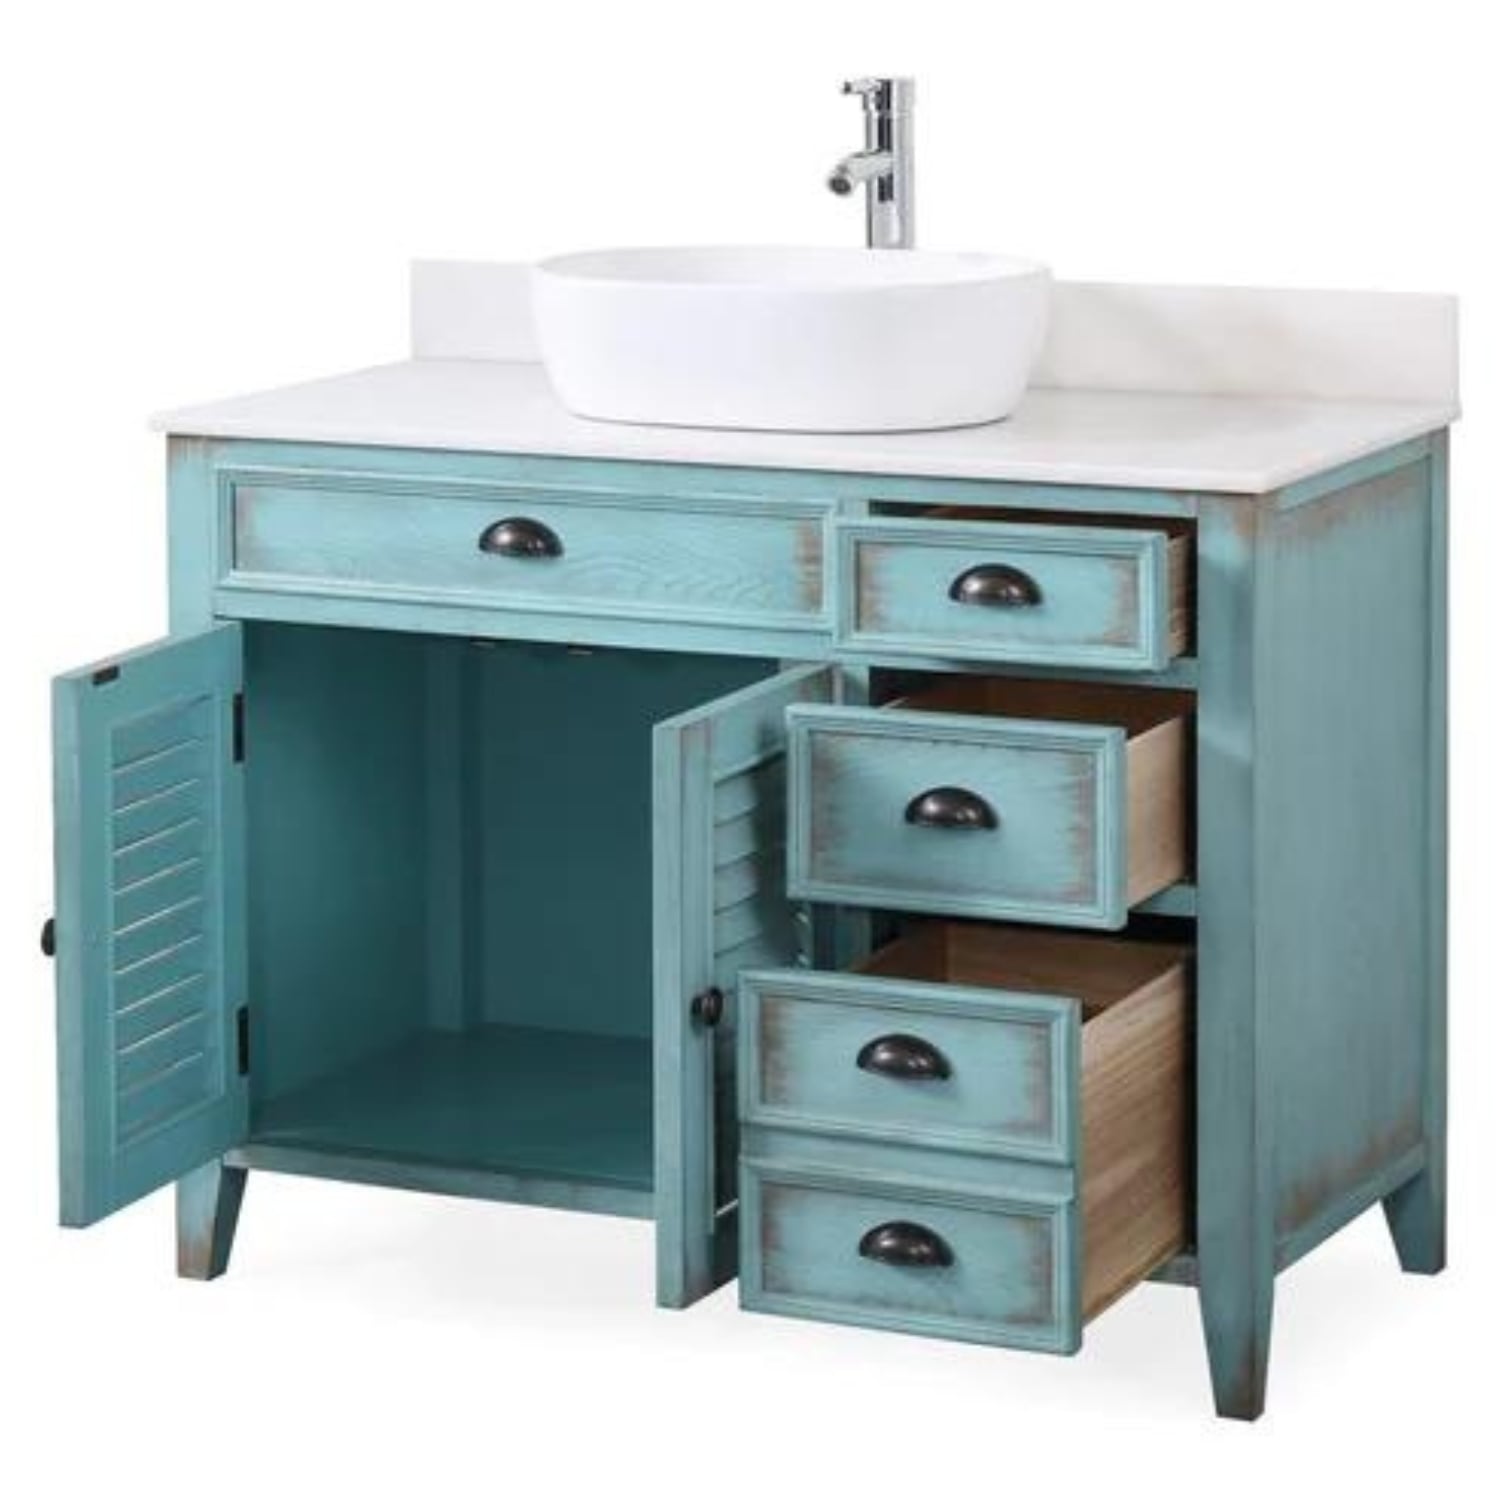 Abbeville 42" Distressed Light Blue Vanity with Vessel Sink - Traditional Bathroom Vanity